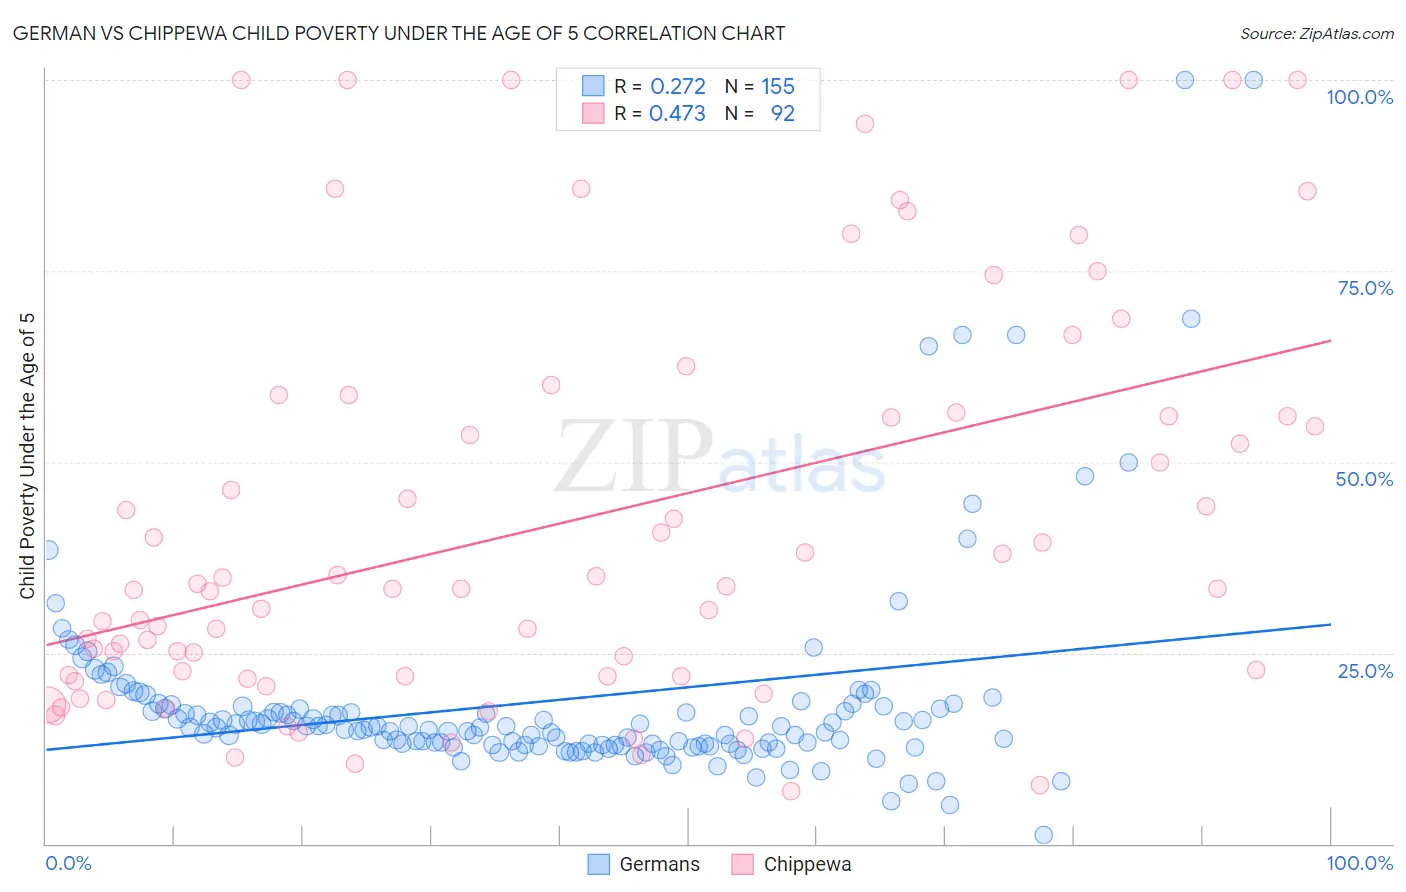 German vs Chippewa Child Poverty Under the Age of 5